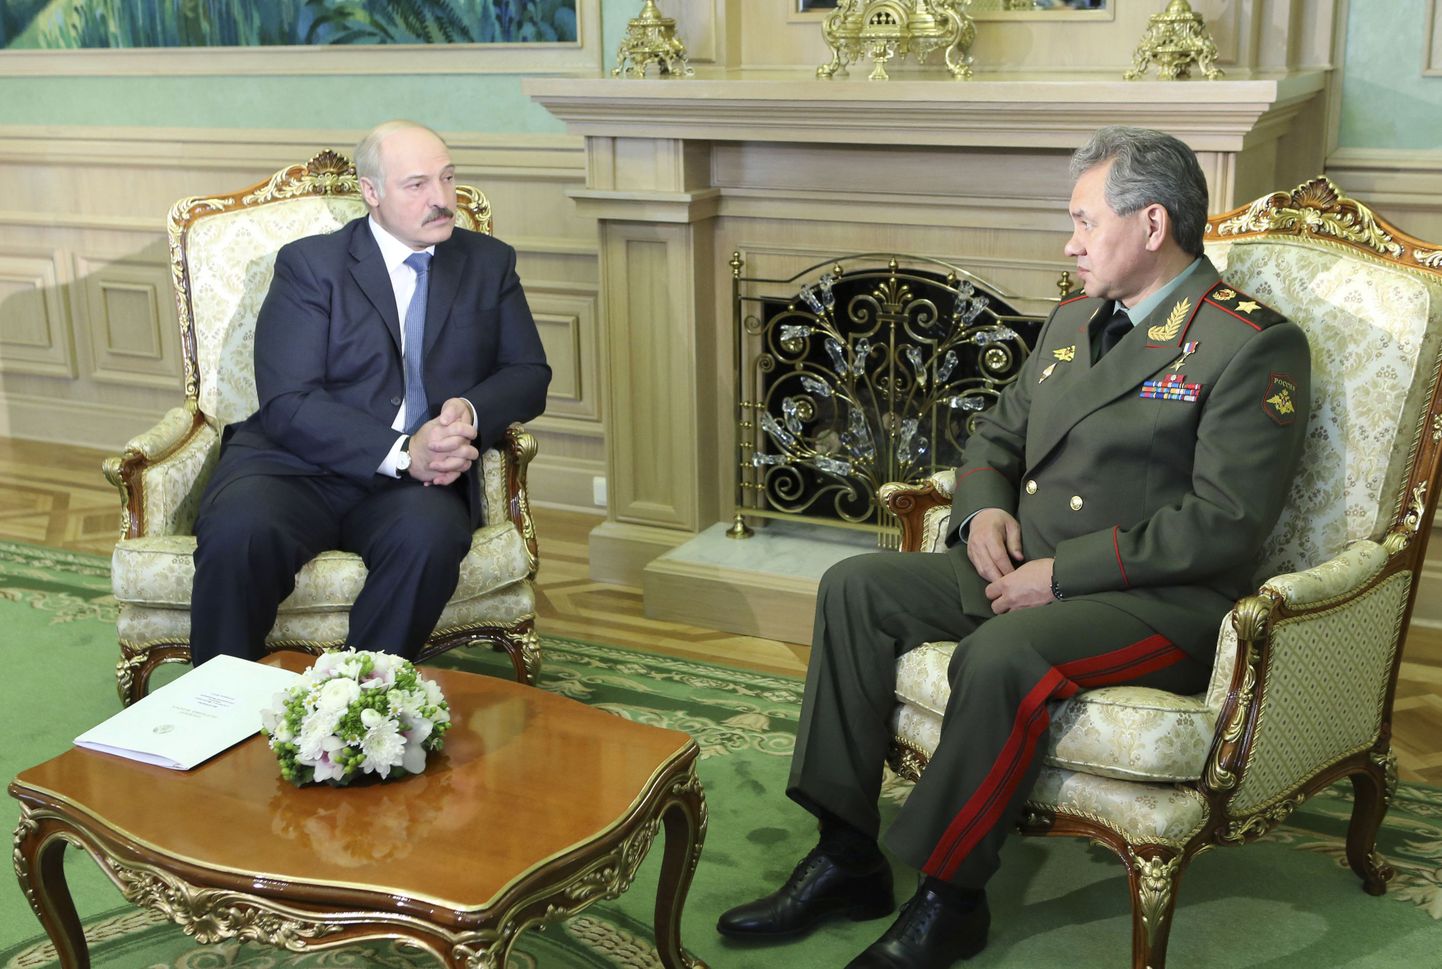 Belarus' President Alexander Lukashenko (L) meets with Russian Defence Minister Sergei Shoigu in Minsk, April 23, 2013. Russia plans to establish a military aviation base in Belarus and supply the neighboring country with S-300 surface-to-air missiles in 2014, according to local media. REUTERS/Nikolai Petrov/Presidential press service/Handout (BELARUS - Tags: POLITICS MILITARY) ATTENTION EDITORS - THIS IMAGE HAS BEEN SUPPLIED BY A THIRD PARTY. IT IS DISTRIBUTED, EXACTLY AS RECEIVED BY REUTERS, AS A SERVICE TO CLIENTS. NO SALES. NO ARCHIVES. FOR EDITORIAL USE ONLY. NOT FOR SALE FOR MARKETING OR ADVERTISING CAMPAIGNS. NO COMMERCIAL USE